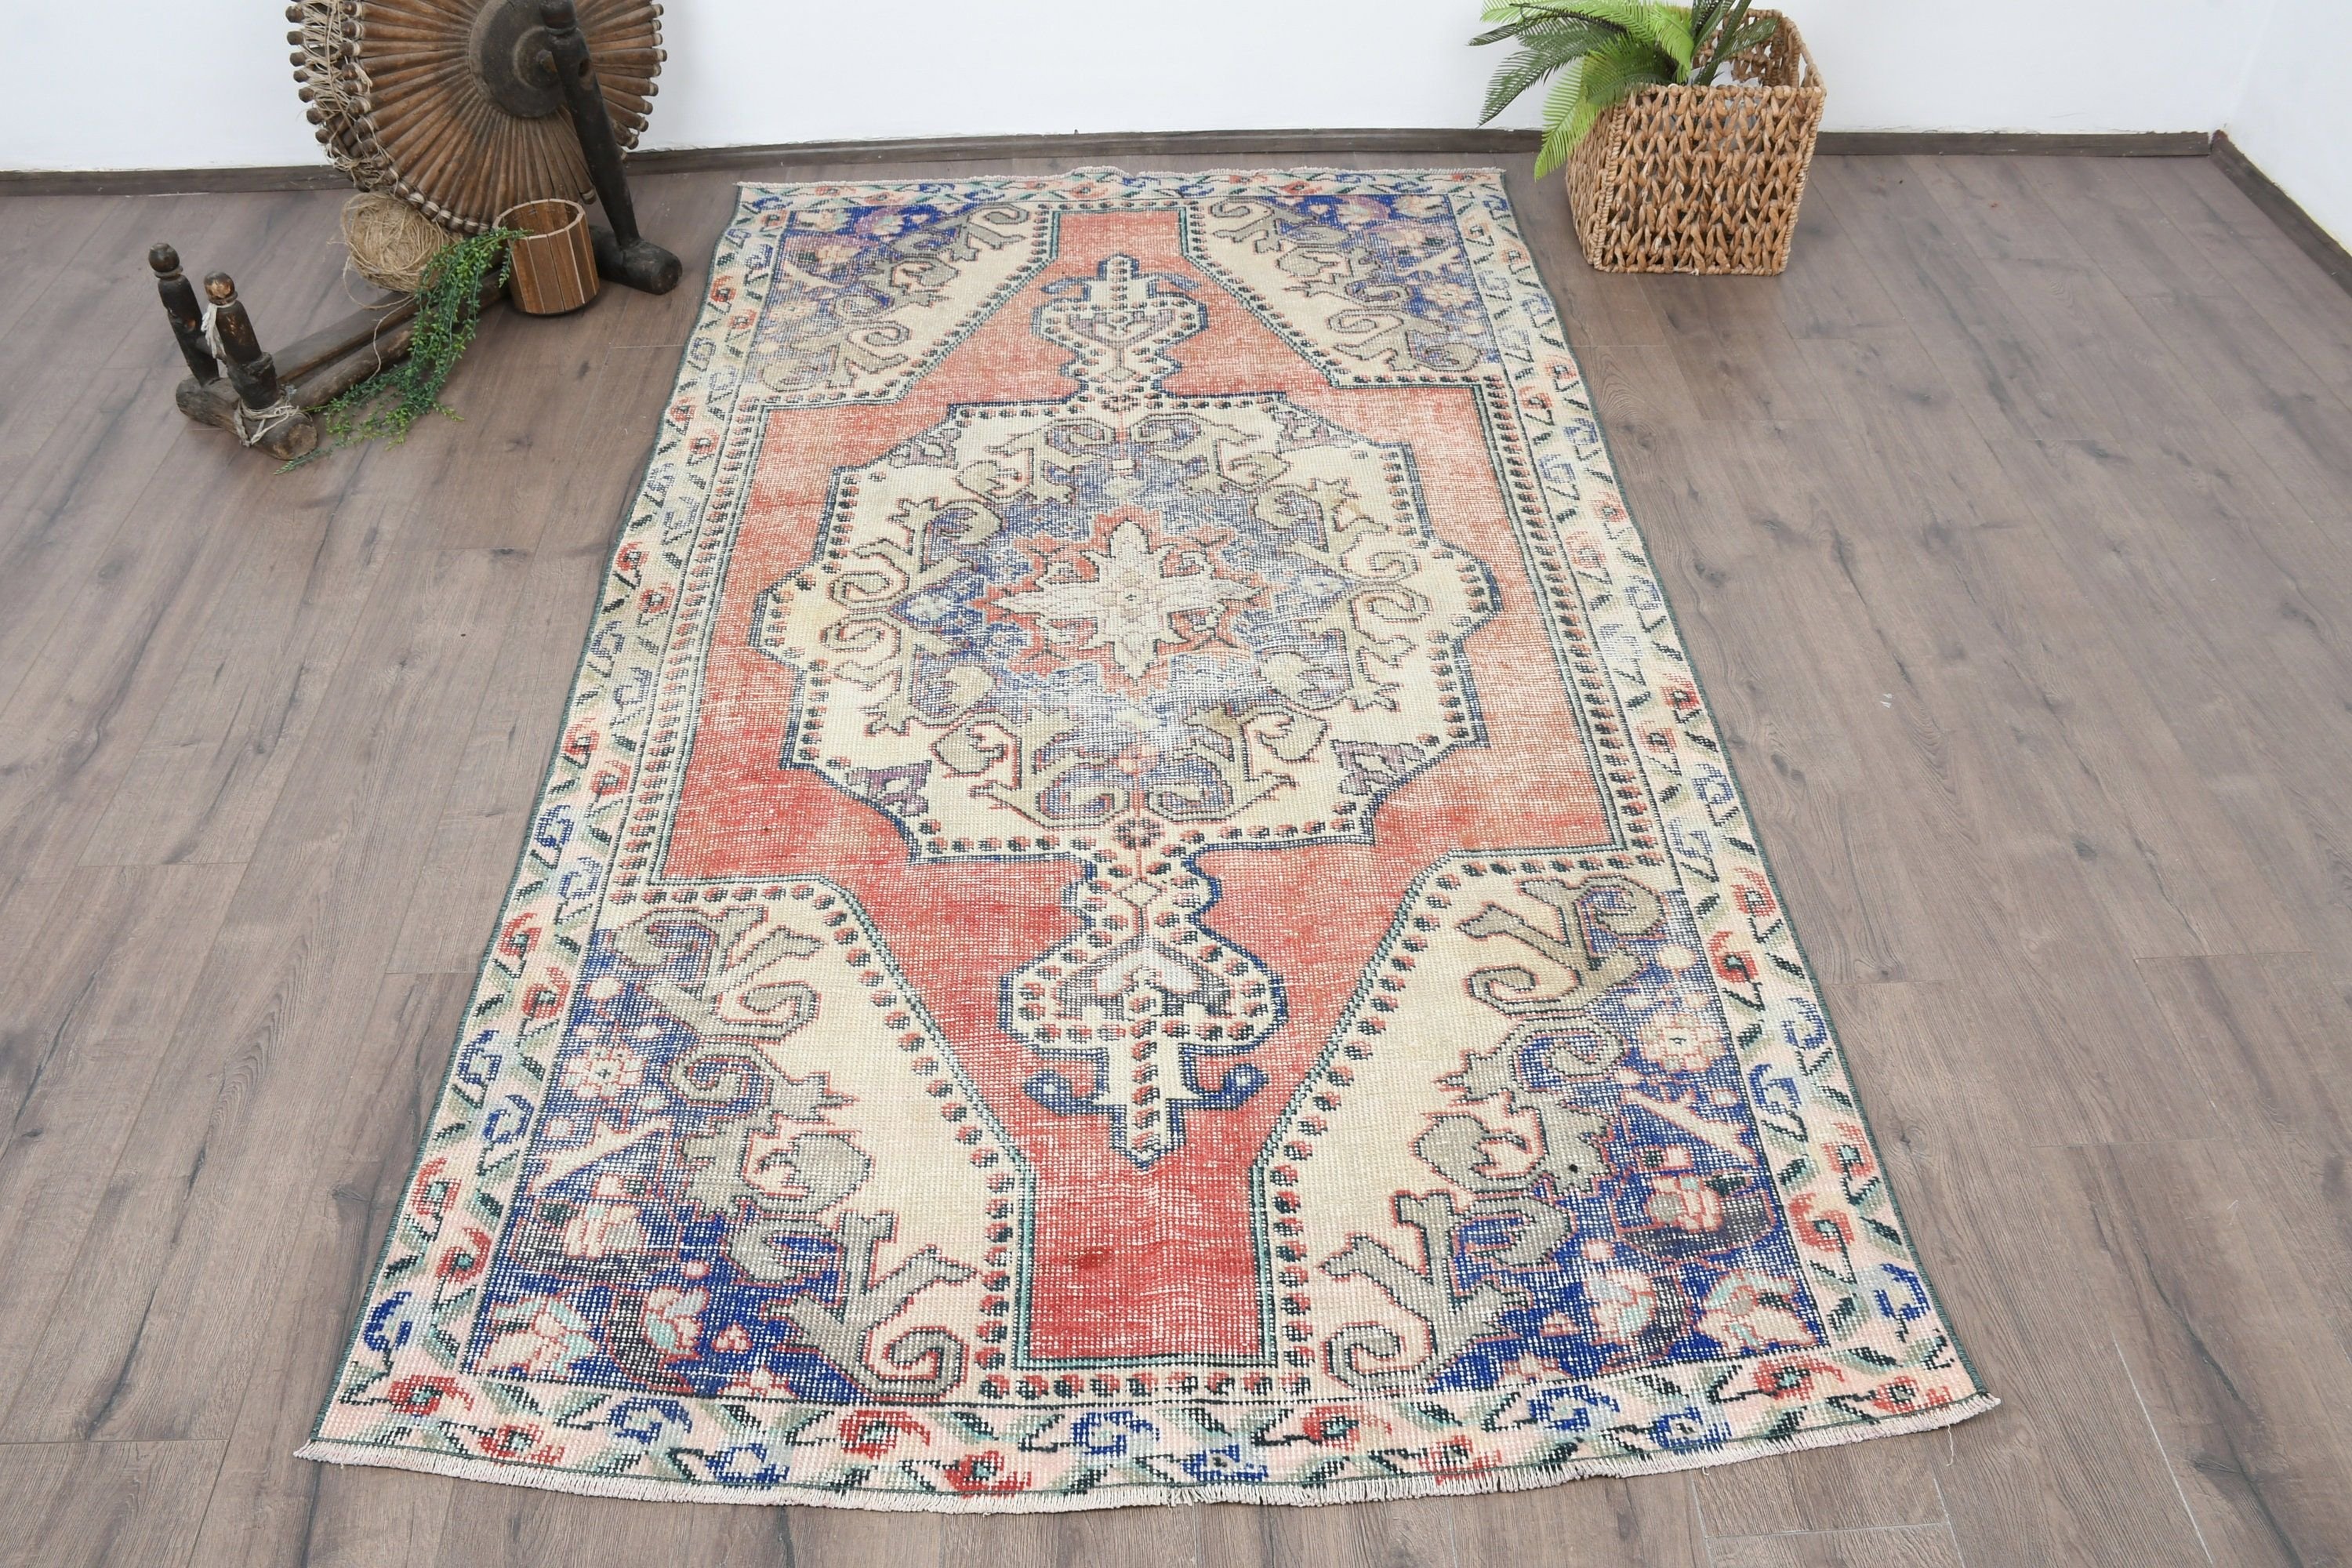 4.3x7.3 ft Area Rugs, Vintage Rug, Bedroom Rugs, Oushak Rugs, Vintage Decor Rug, Red Antique Rug, Rugs for Area, Turkish Rugs, Kitchen Rugs